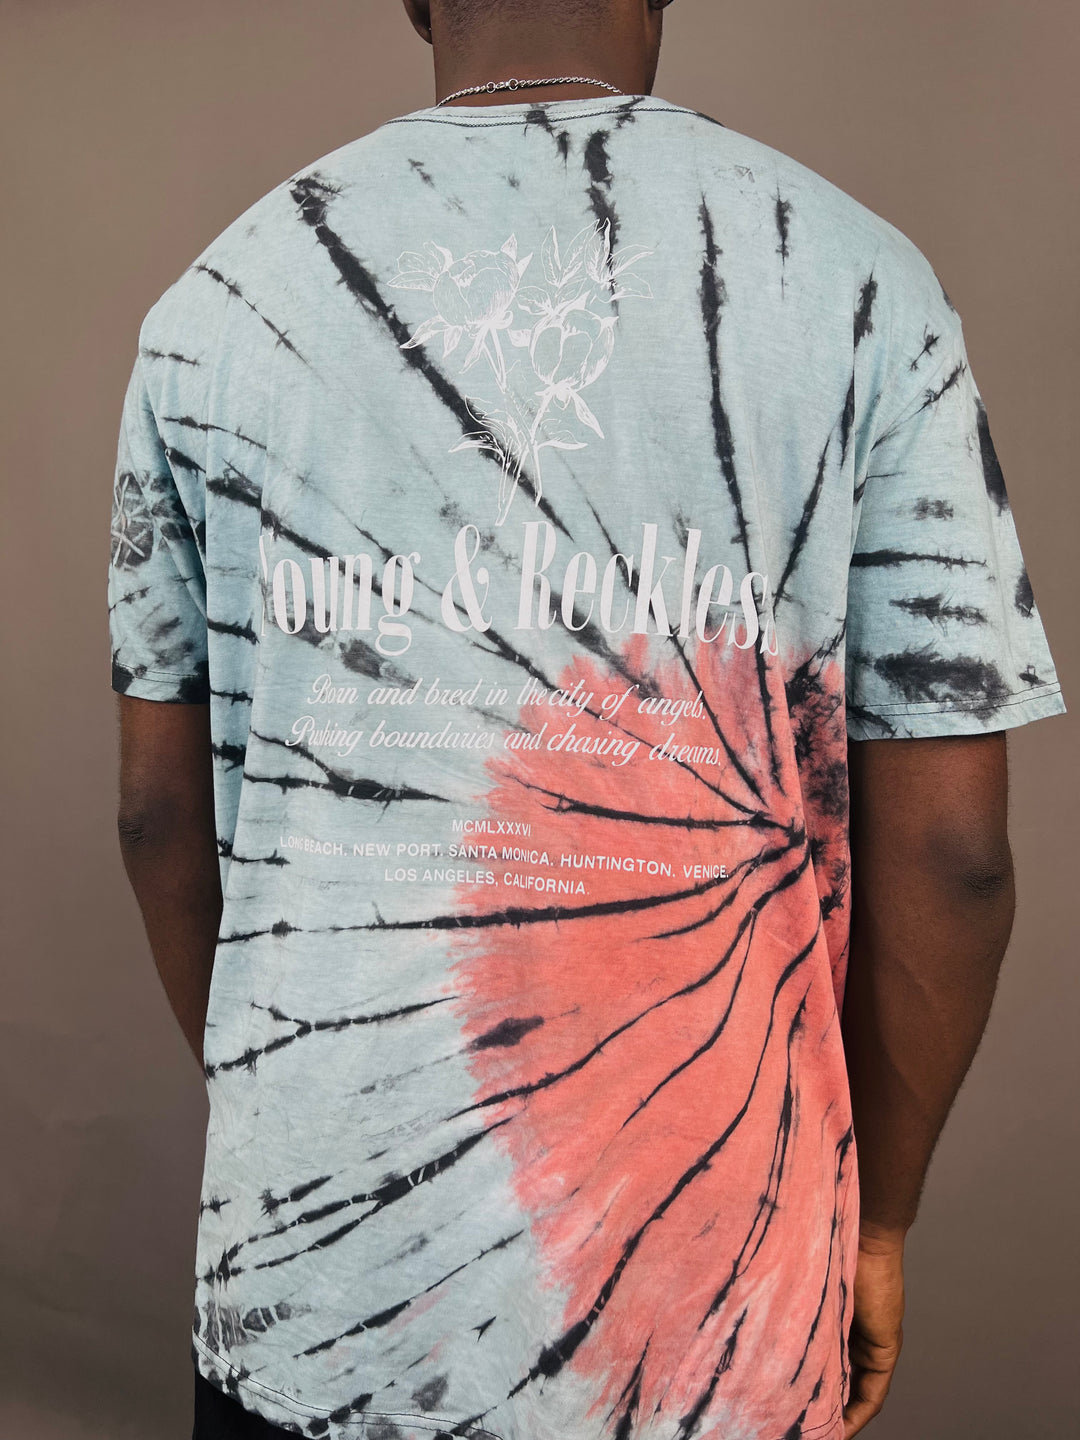 Young & Reckless pink and blue tie dye t-shirt